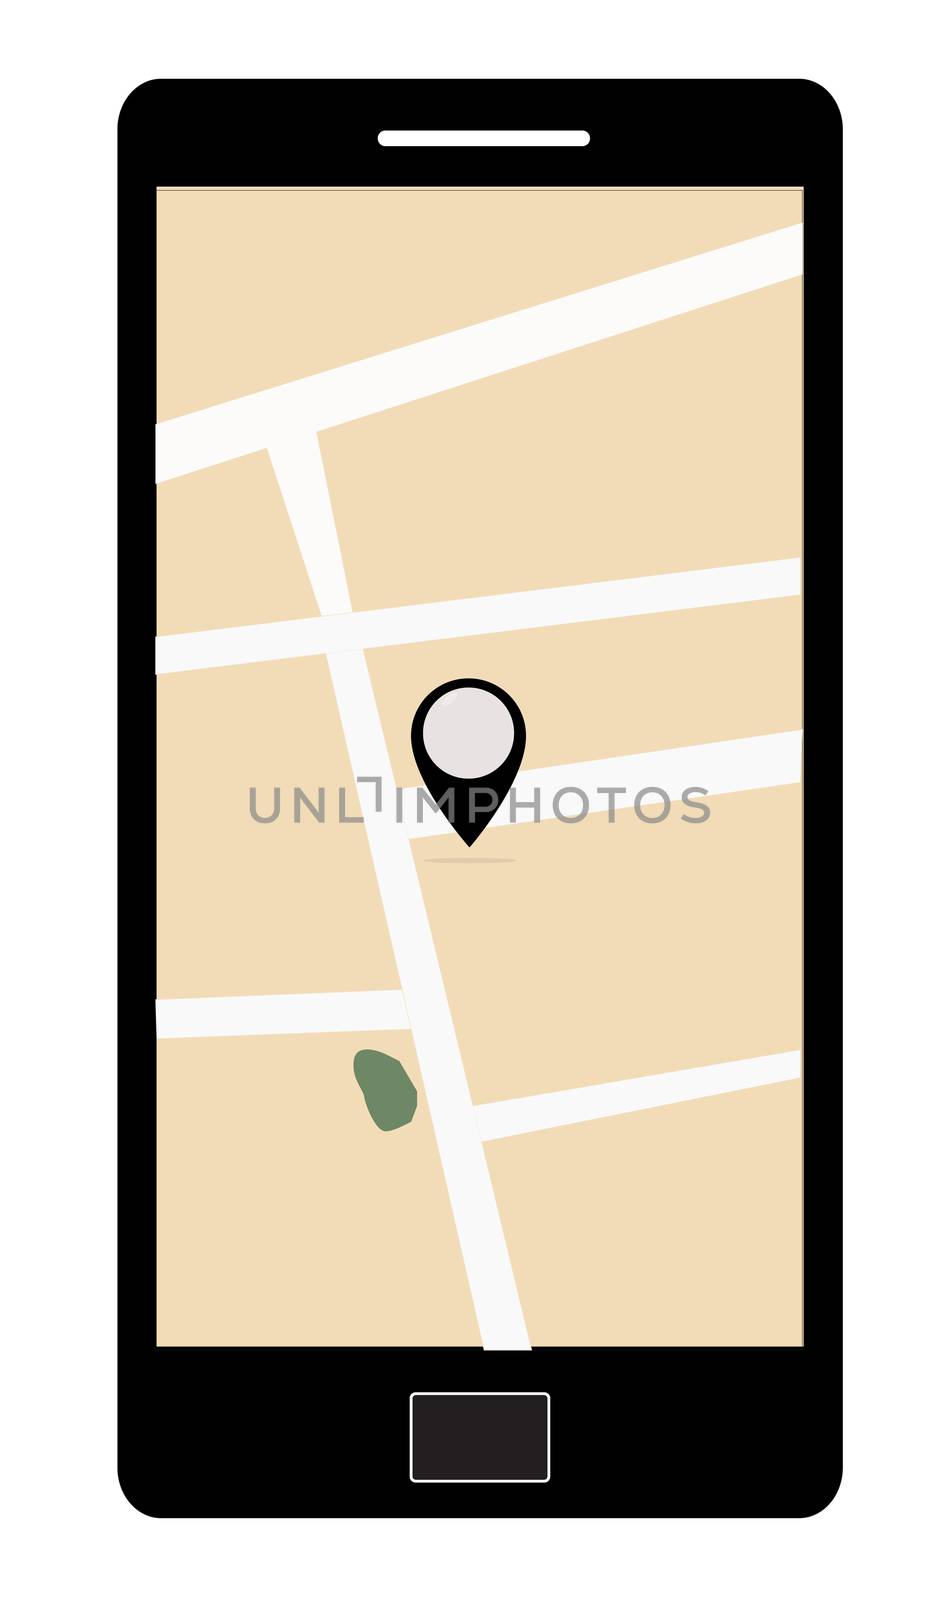 location map pin on phone